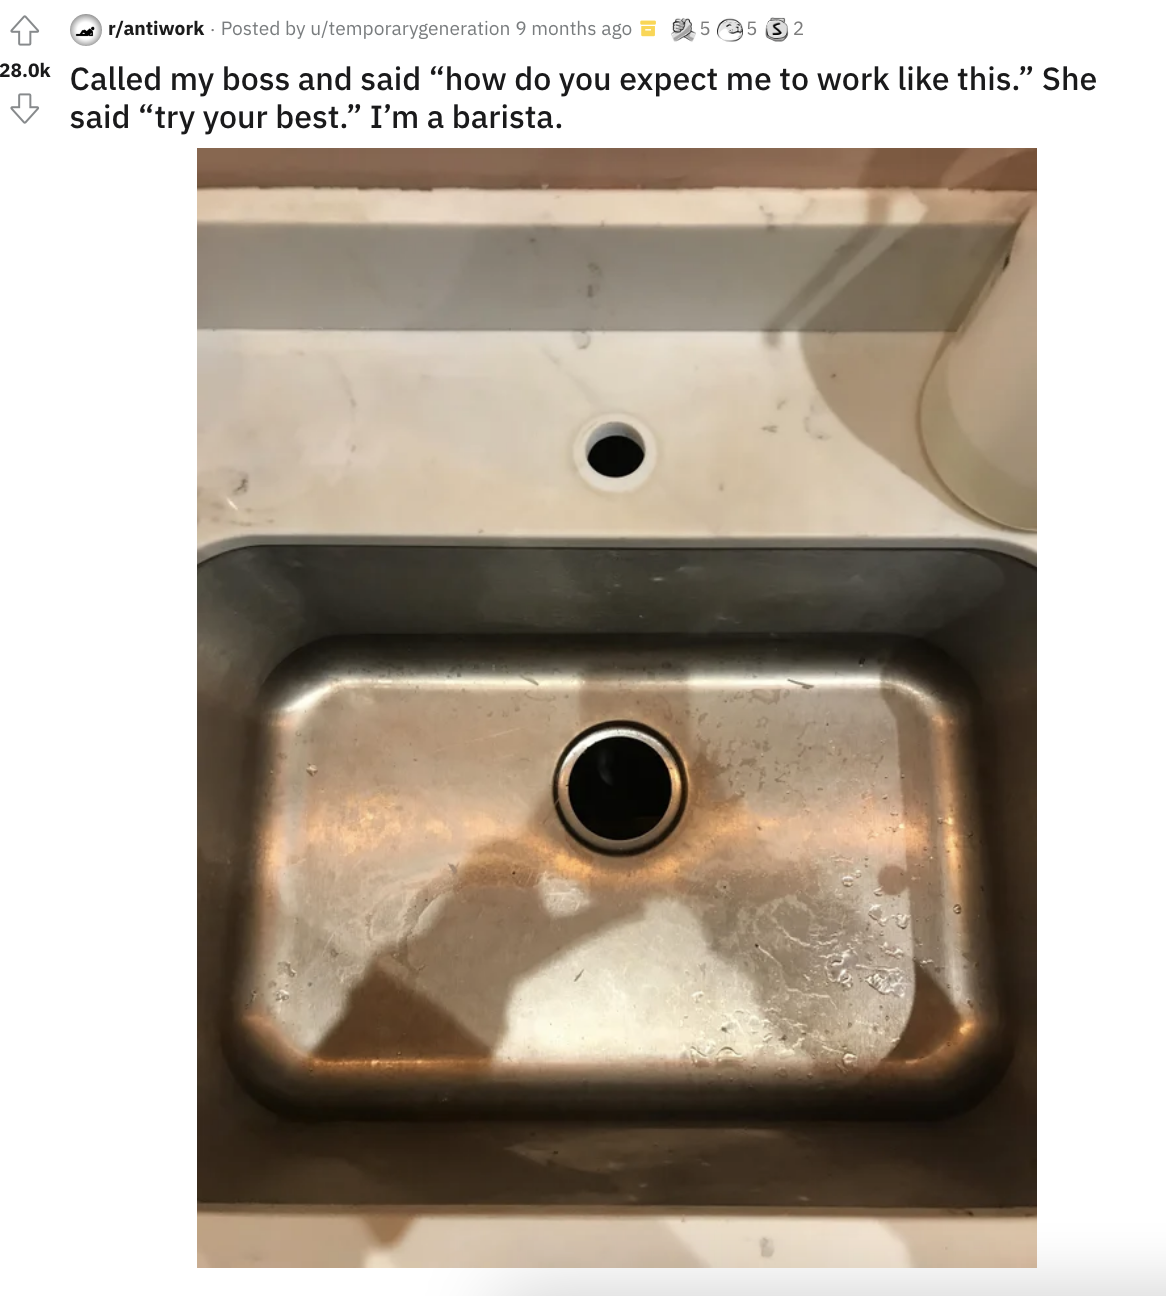 A sink without a faucet